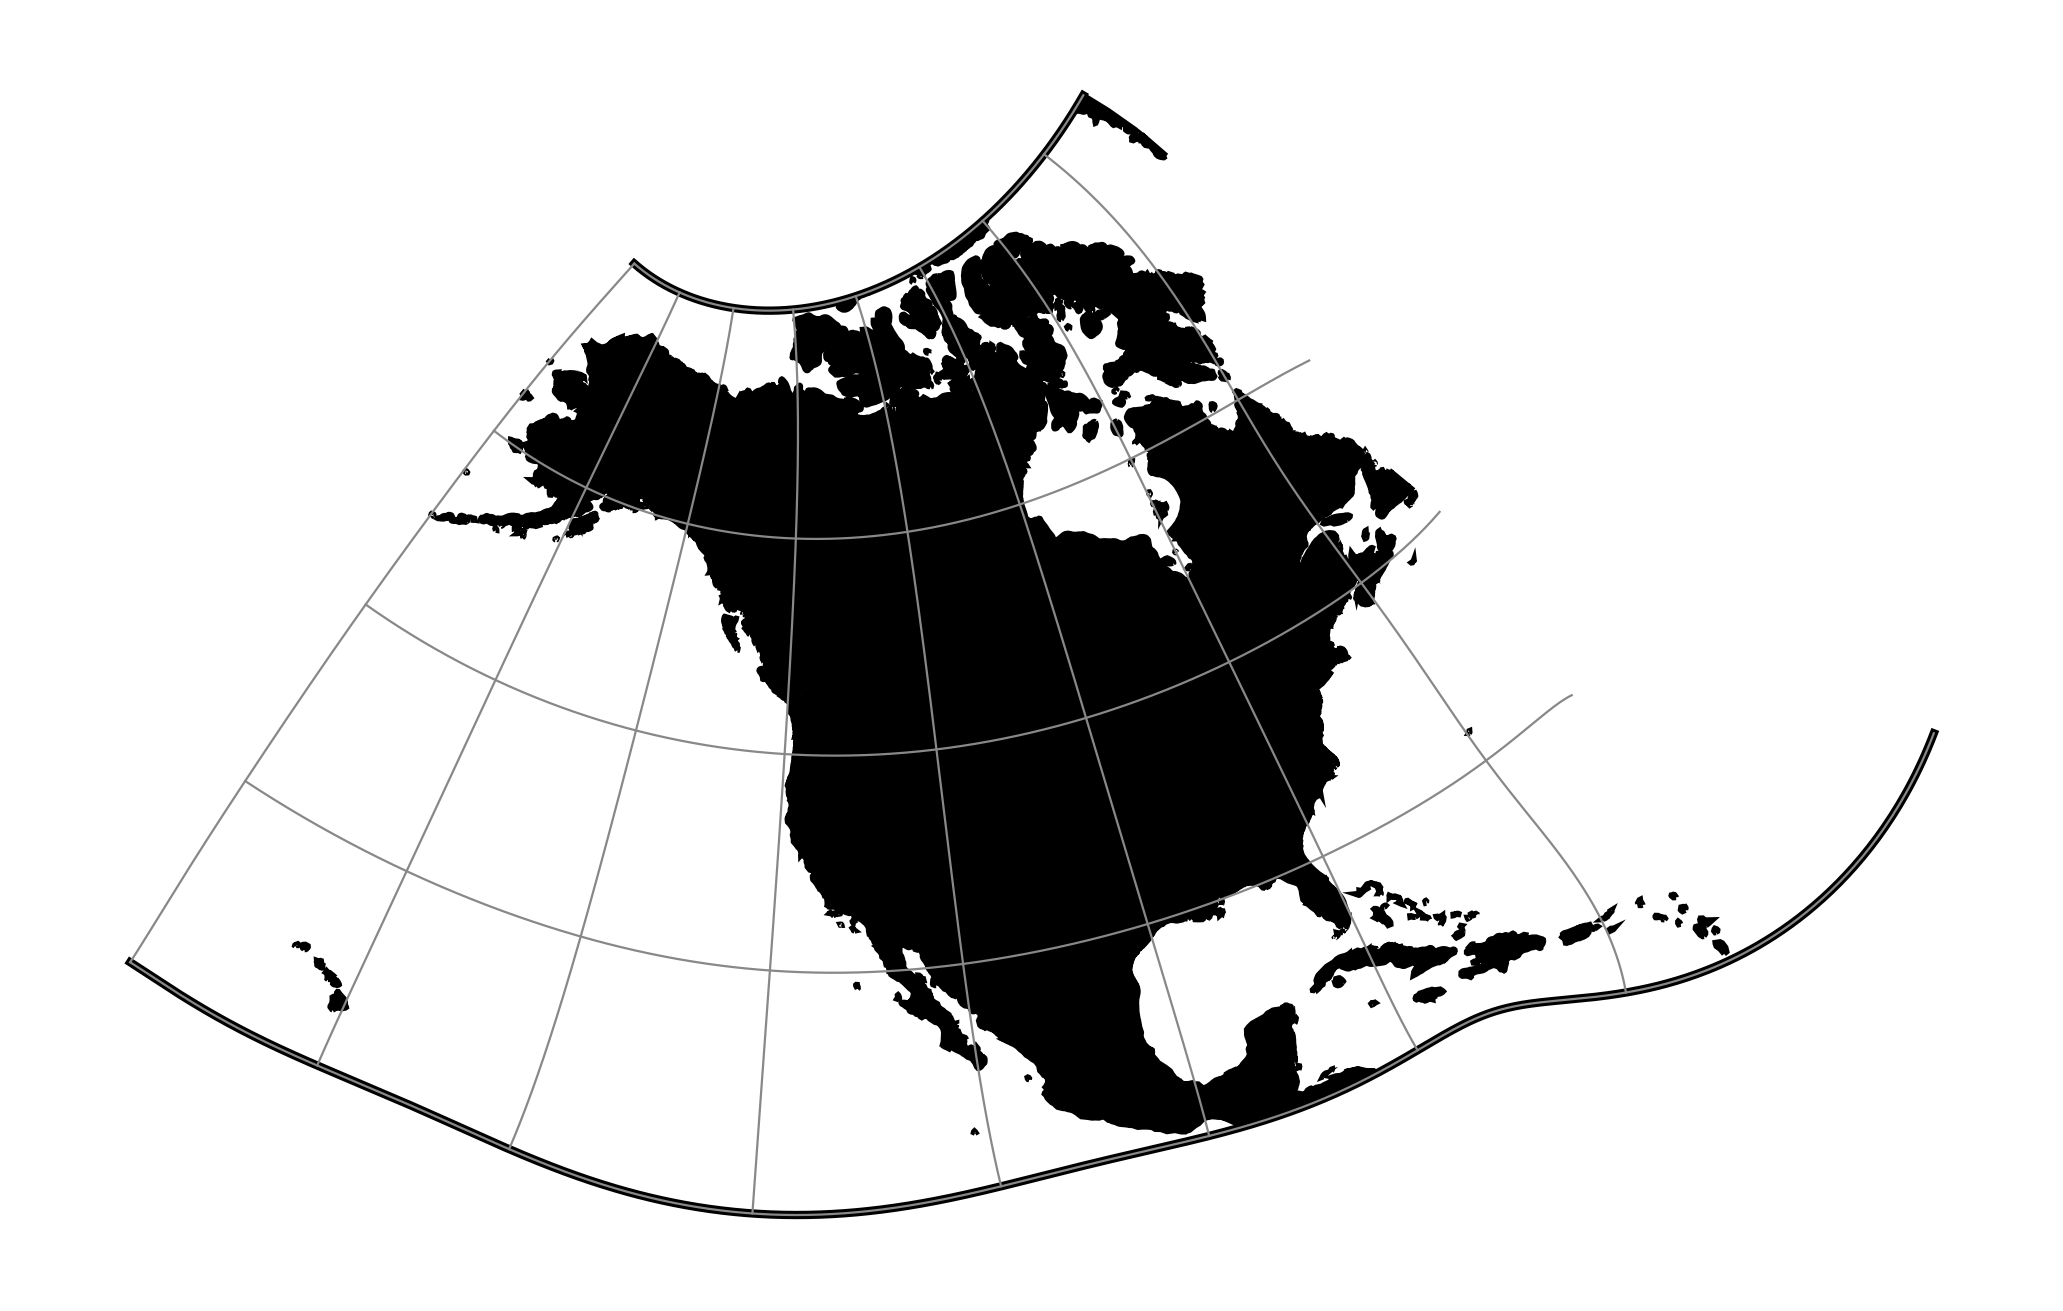 Modified Stereographic of the 50 U.S. states